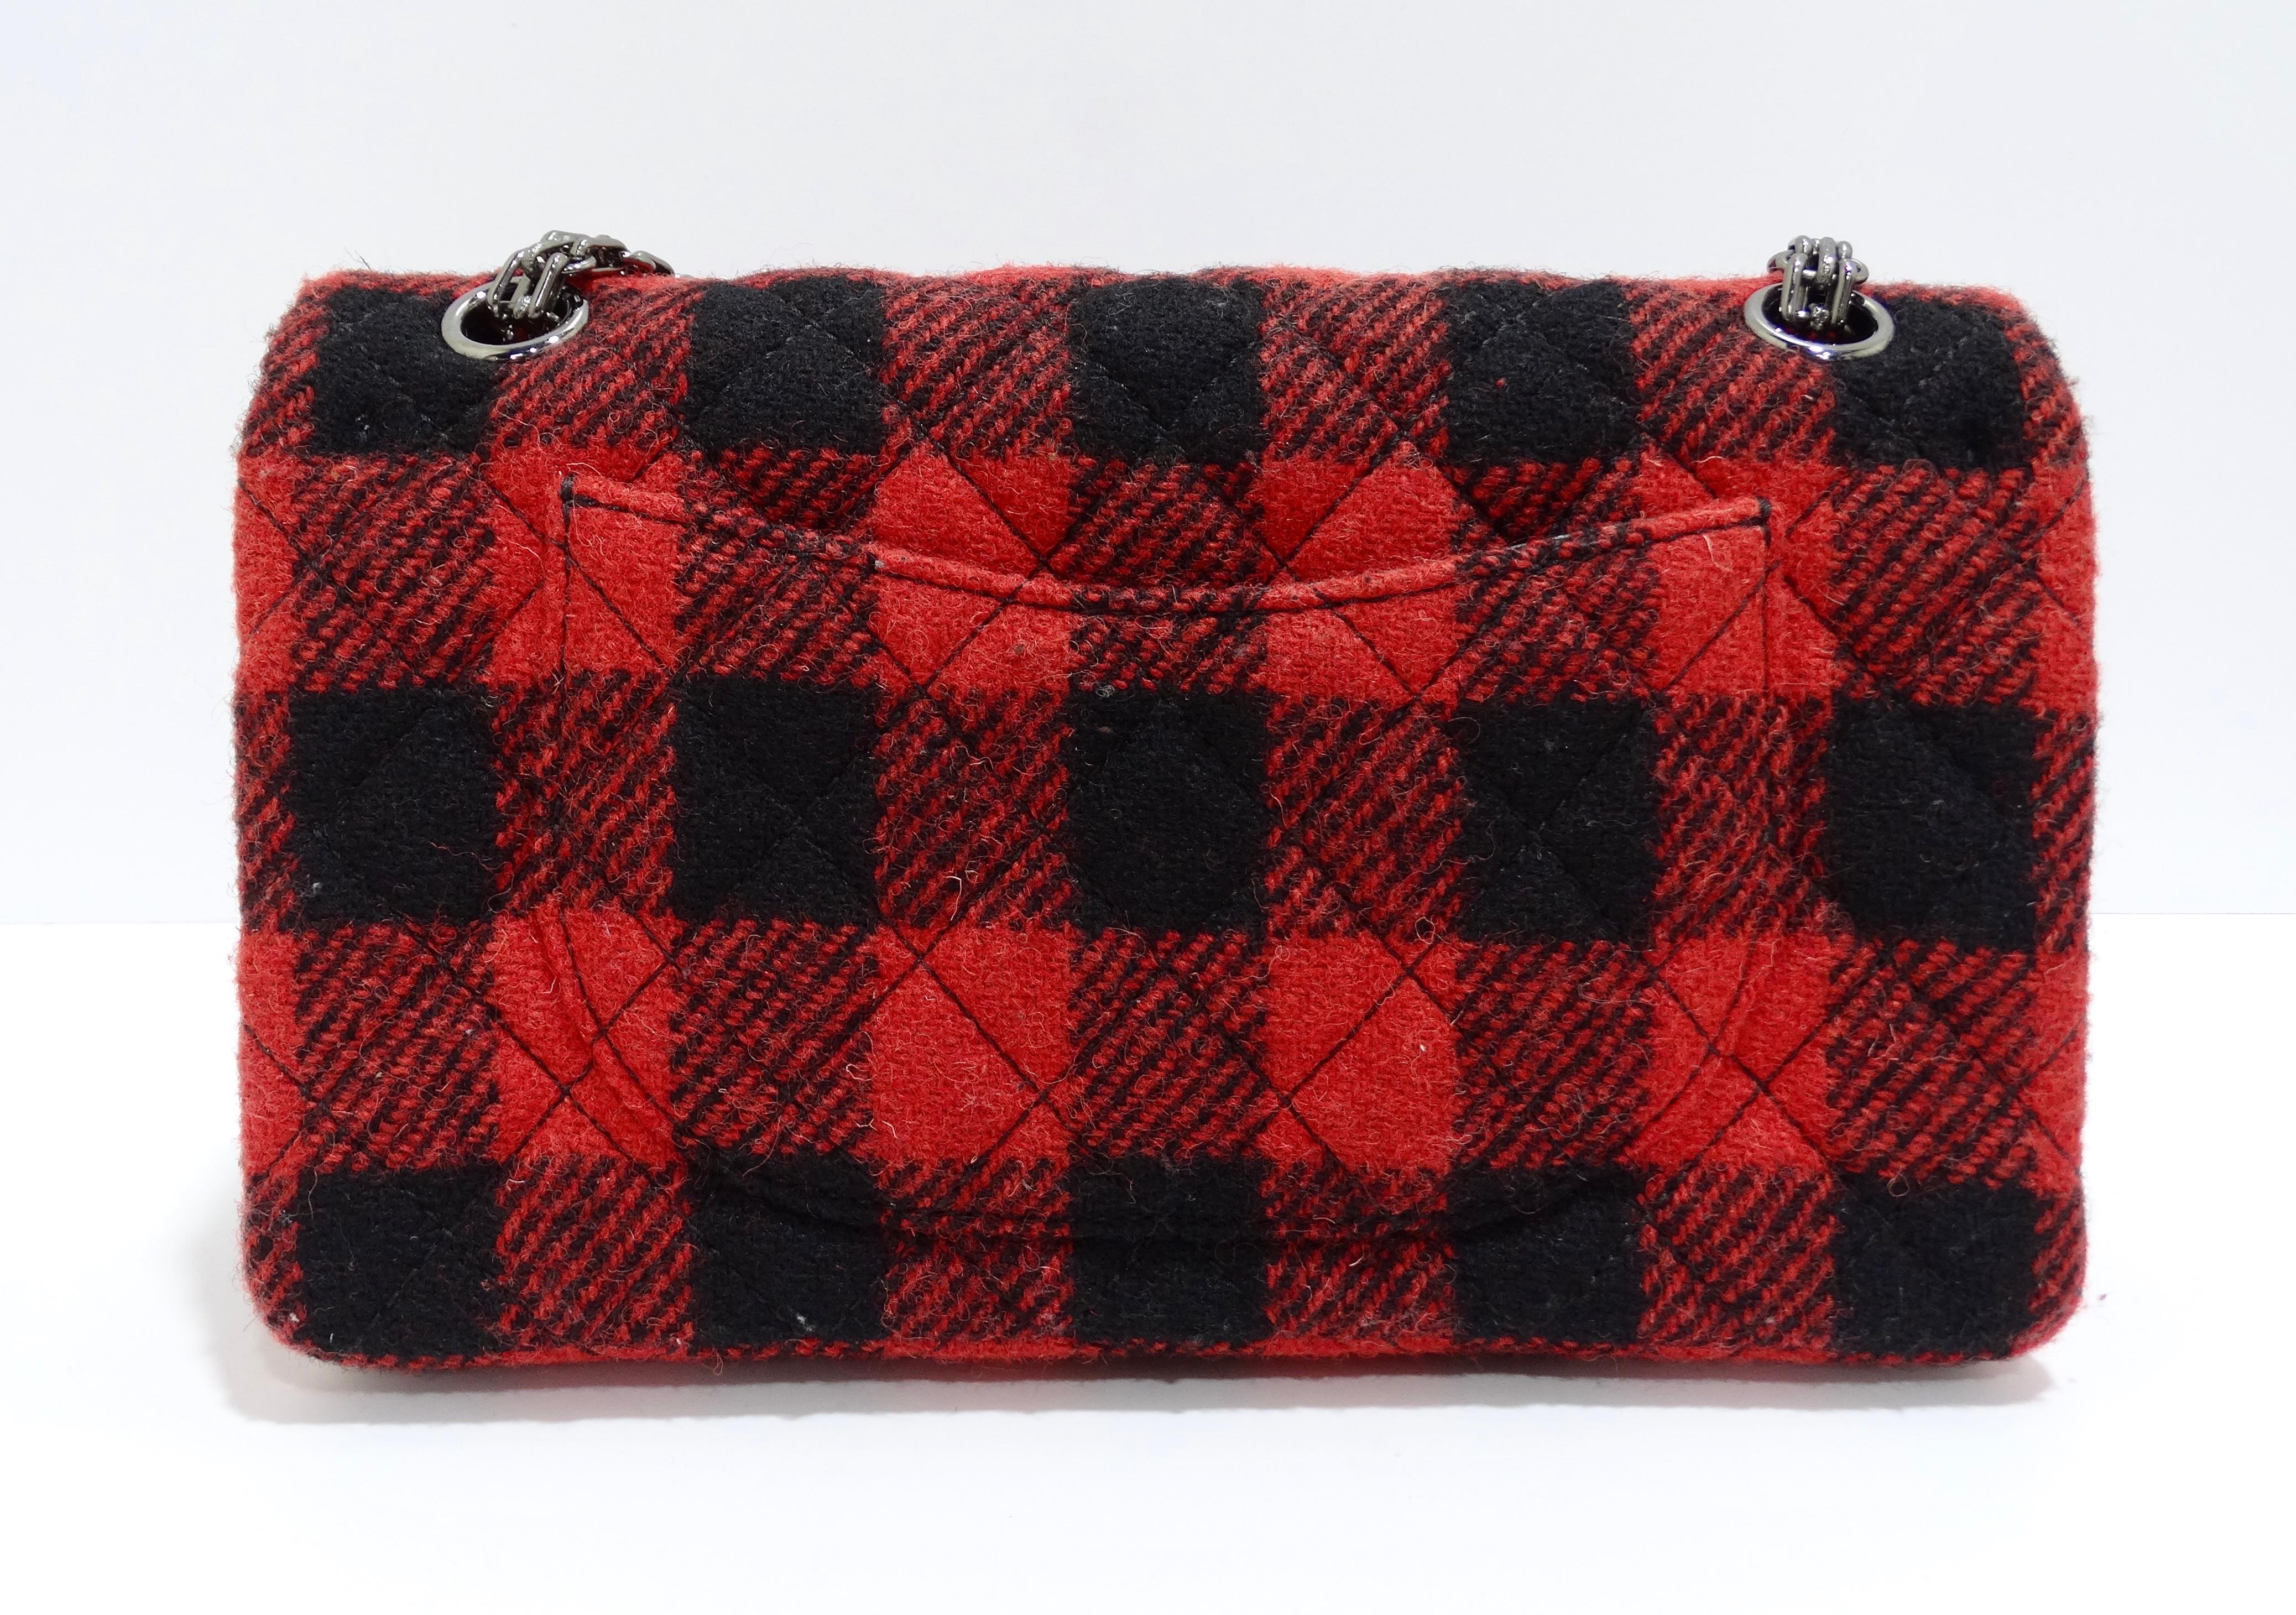 Chanel Reissue 2.55 Flap Bag Plaid Quilted Tweed In Good Condition For Sale In Scottsdale, AZ